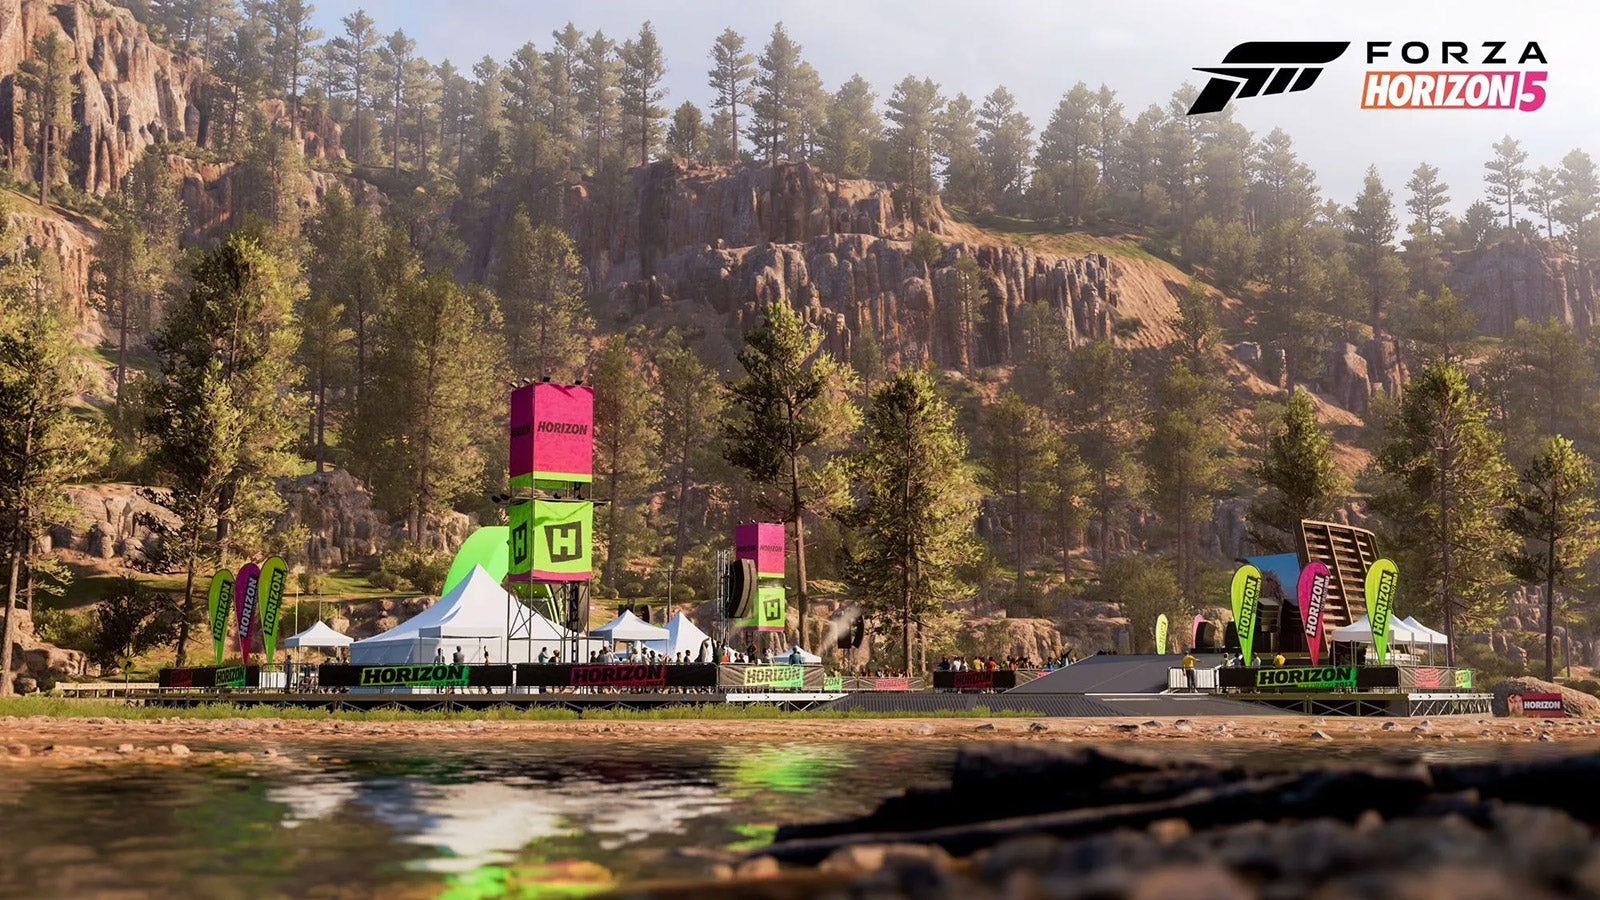 Forza Horizon 5 Is Getting a Big Update for the Series’ 10th Birthday